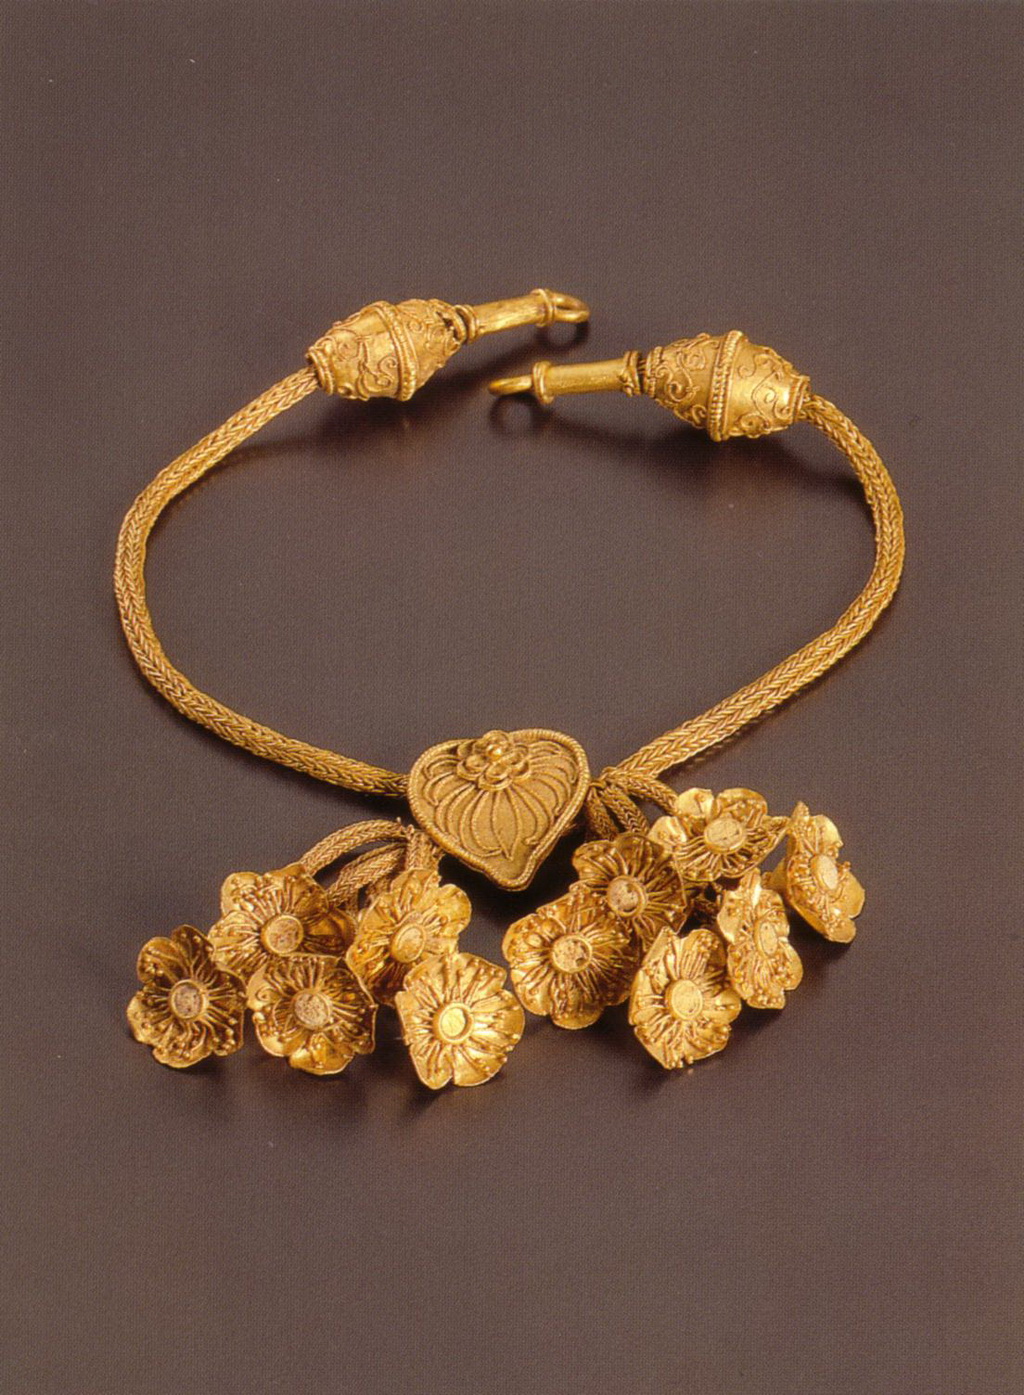 03 - Necklace - Greek - 4th C BC - Gold